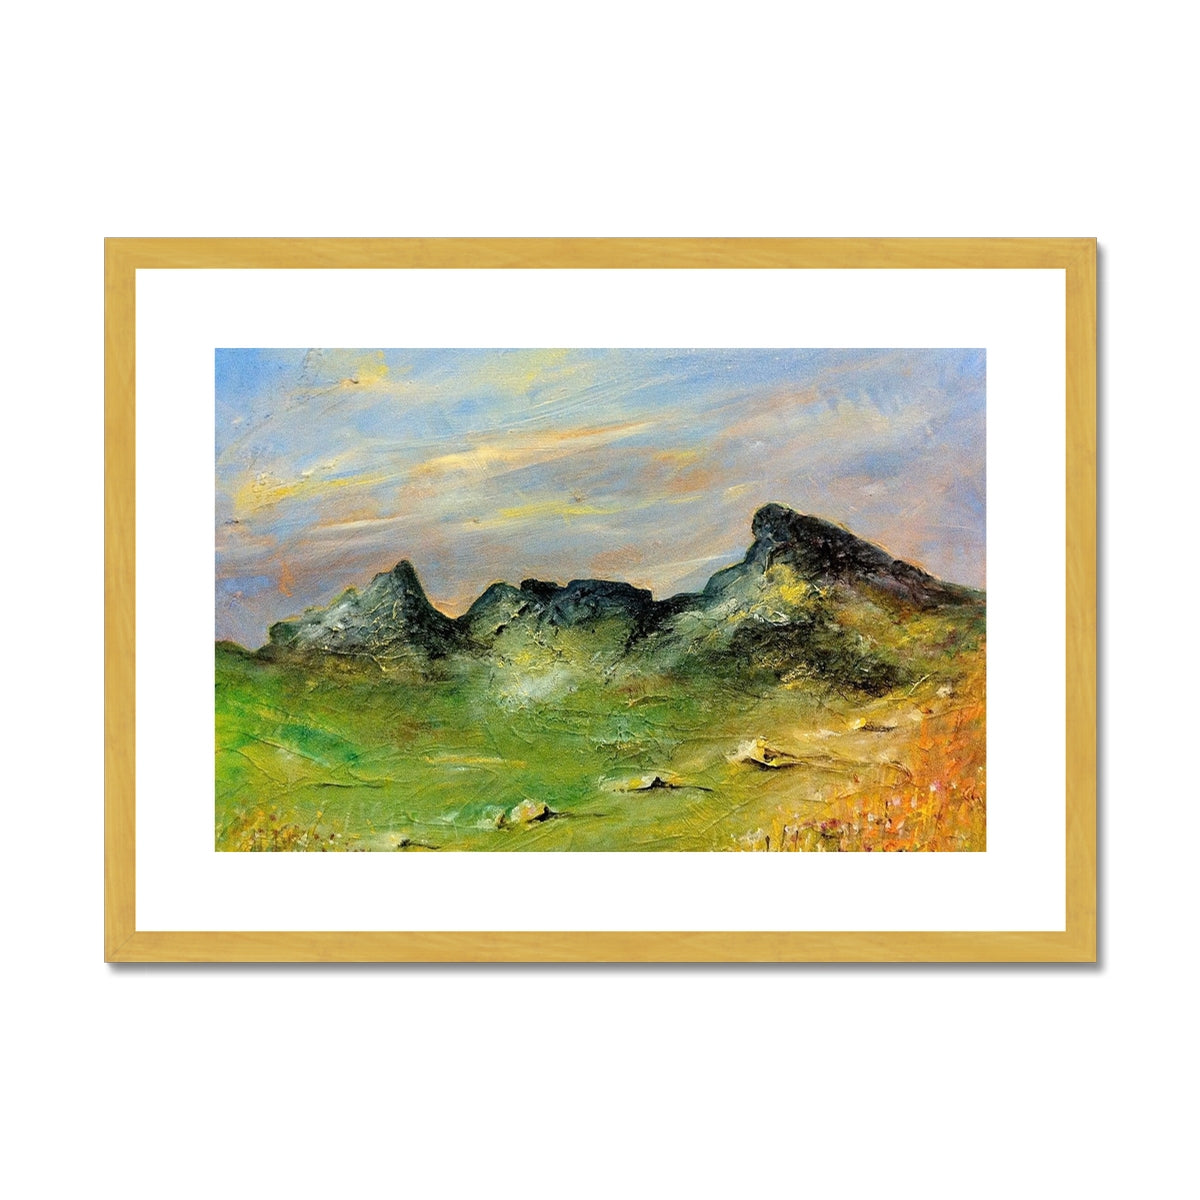 The Cobbler Painting | Antique Framed & Mounted Prints From Scotland-Antique Framed & Mounted Prints-Scottish Lochs & Mountains Art Gallery-A2 Landscape-Gold Frame-Paintings, Prints, Homeware, Art Gifts From Scotland By Scottish Artist Kevin Hunter